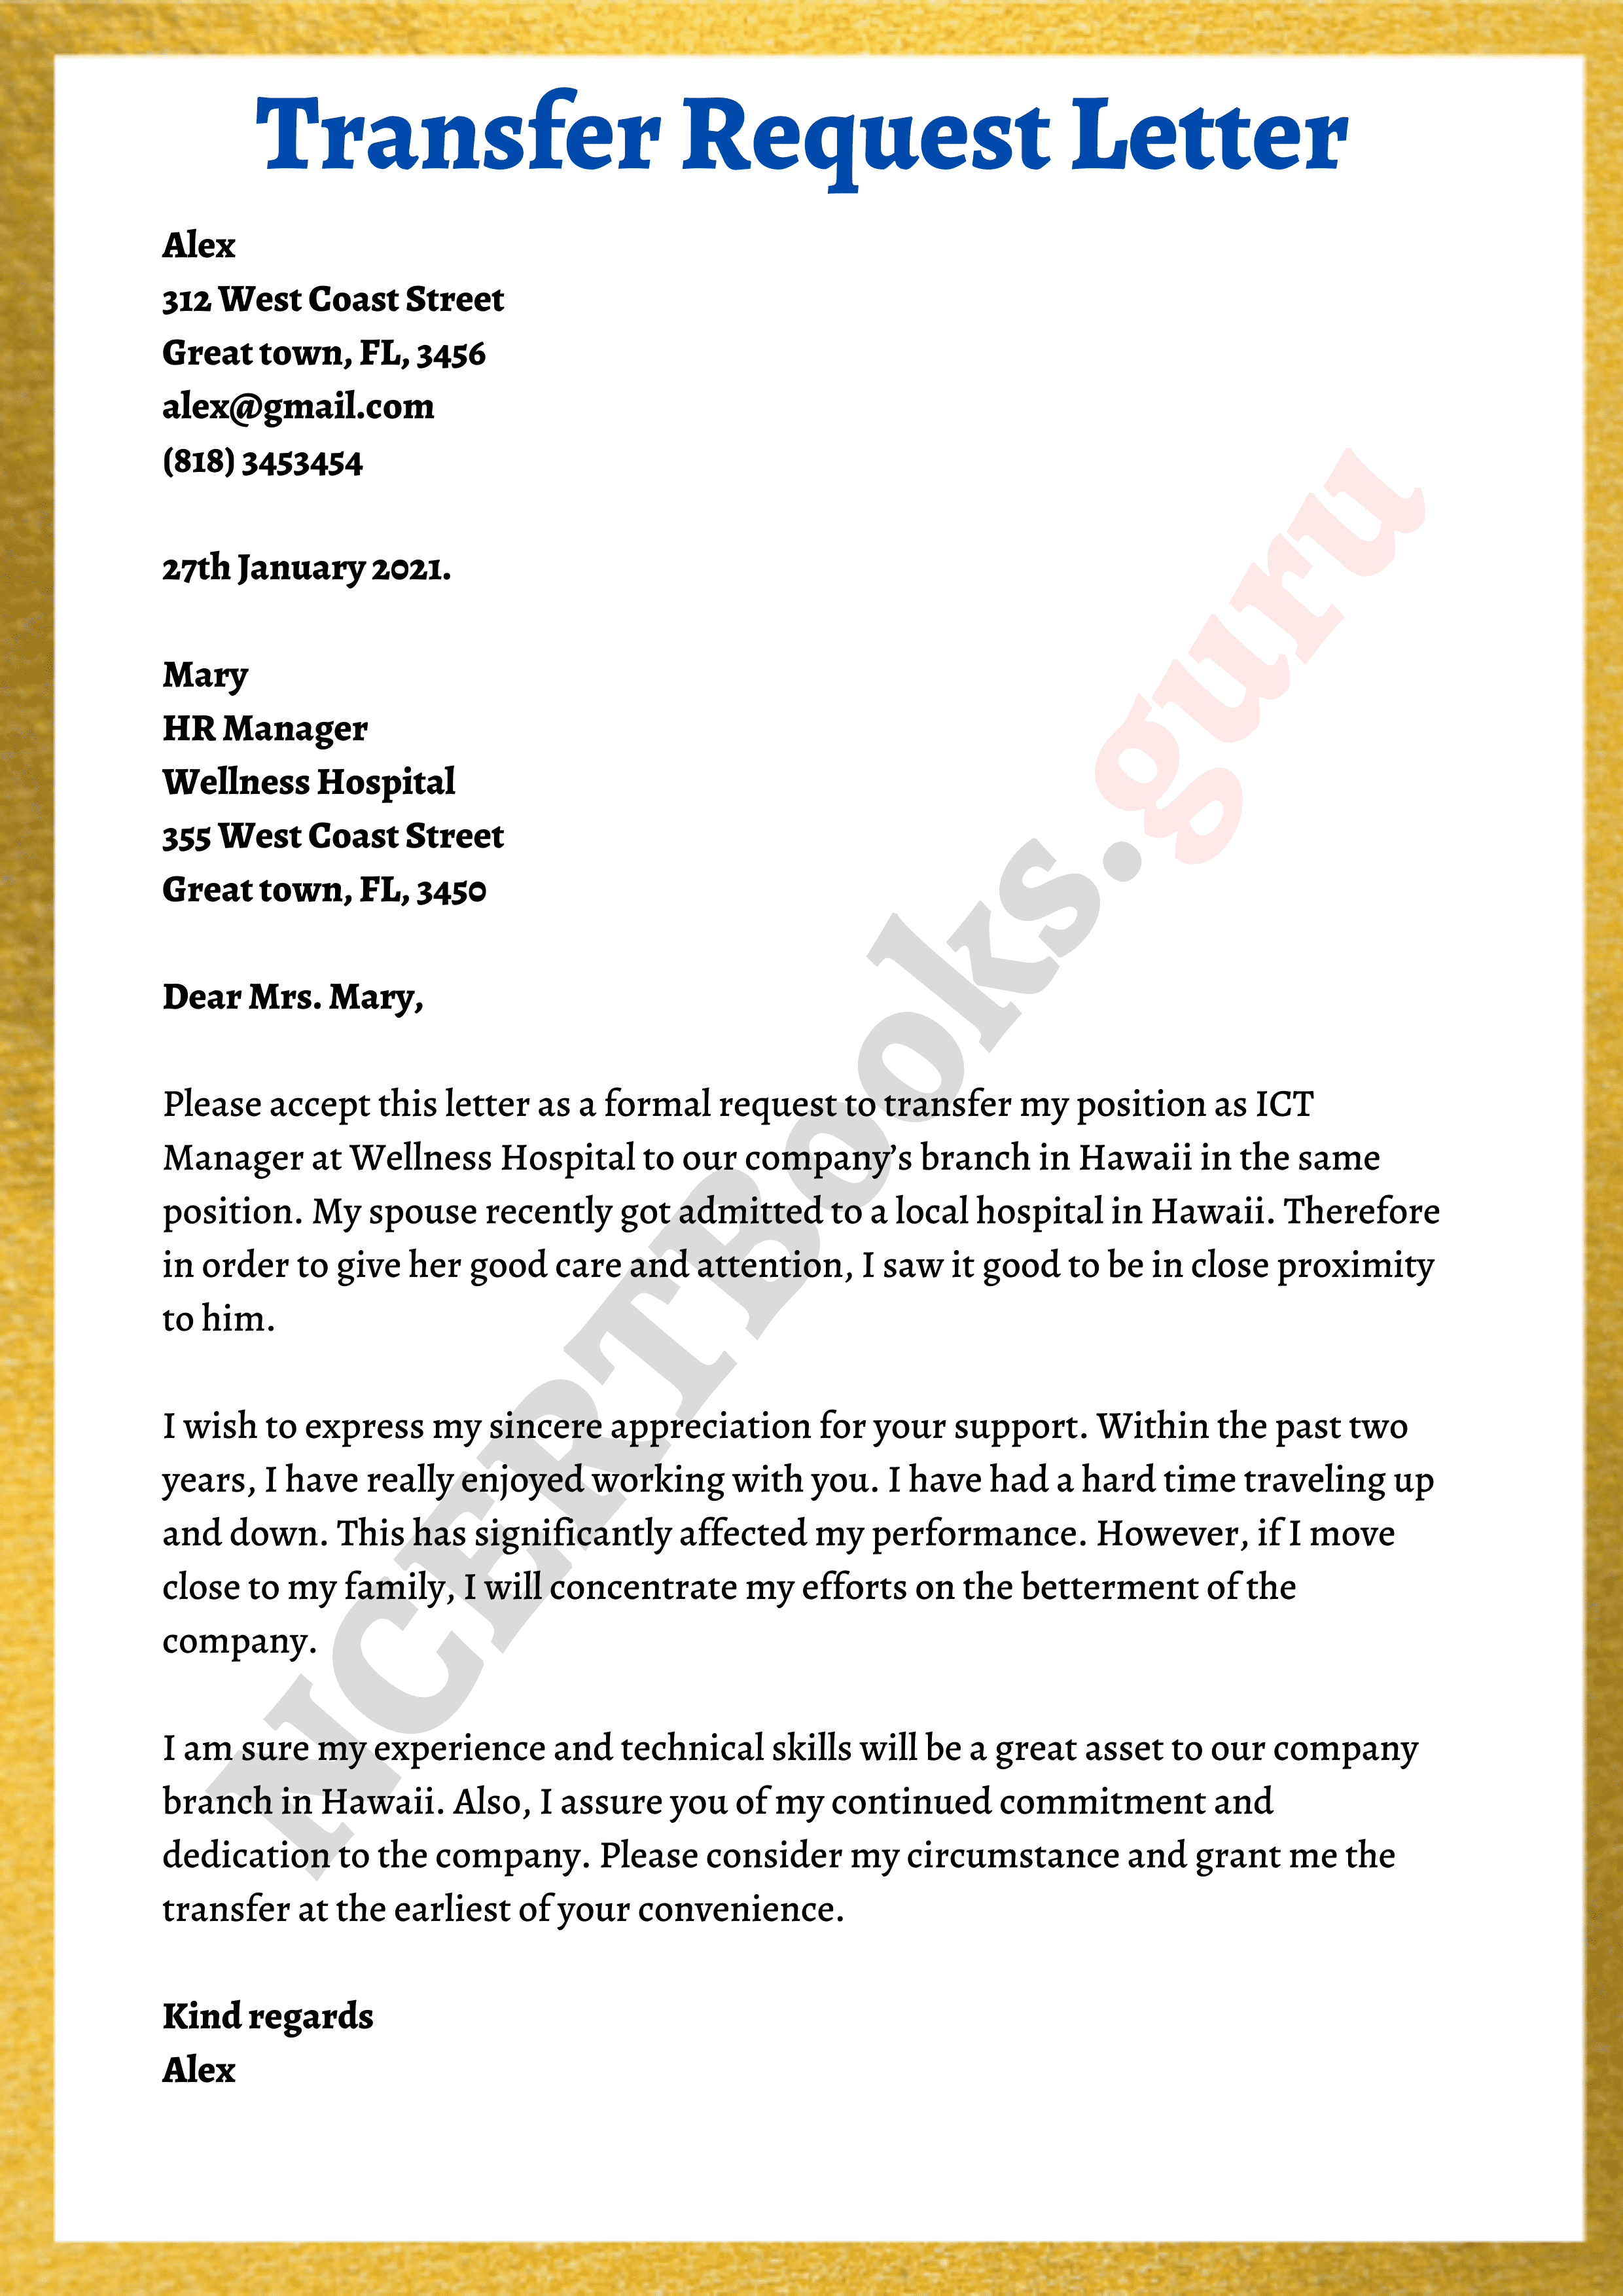 Transfer Request Letter